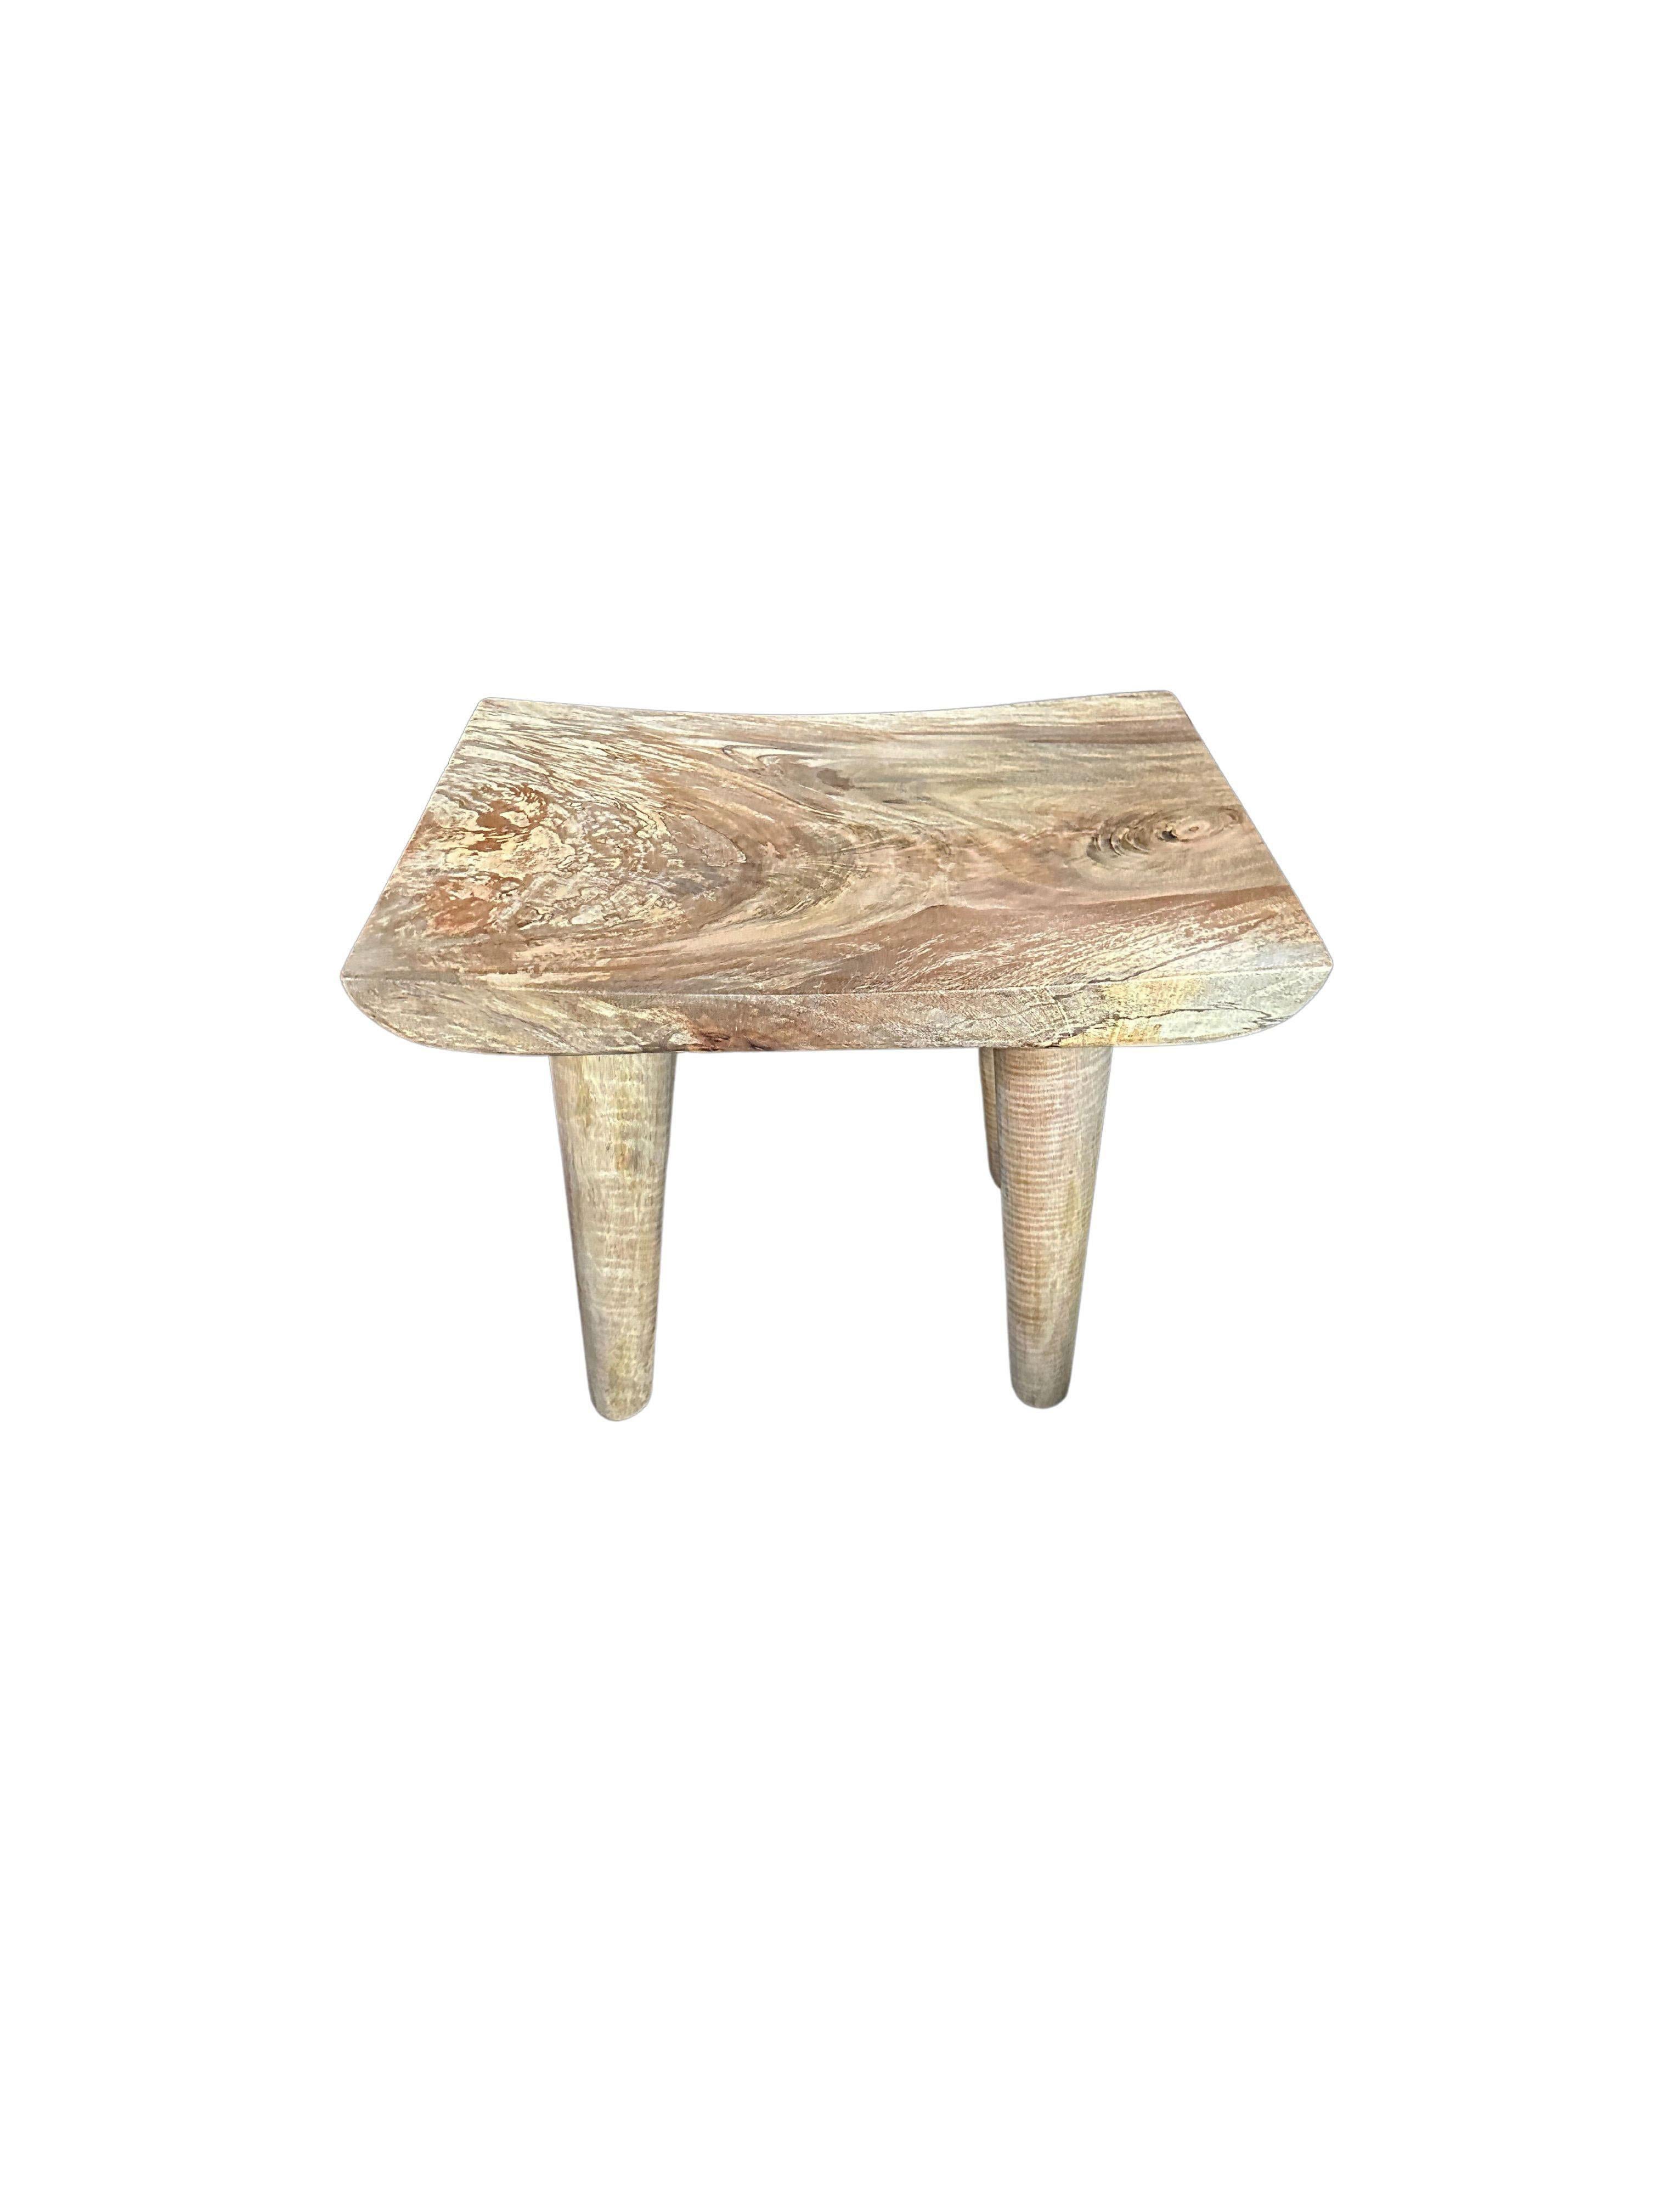 Hand-Crafted Sculptural Mango Wood Stool with Curved Seat, Natural Finish For Sale